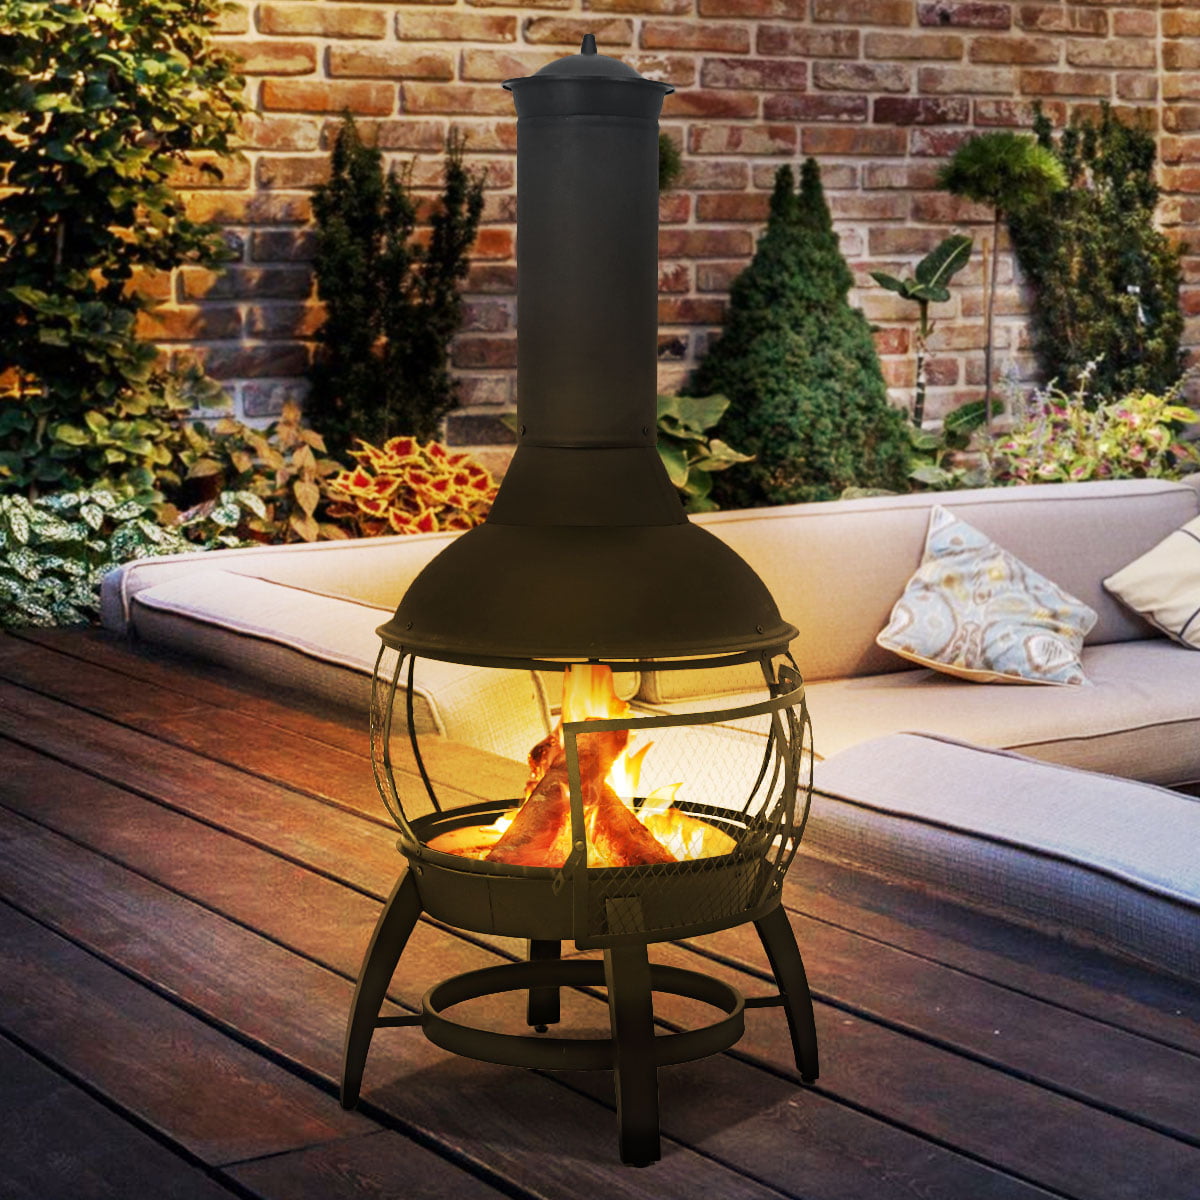 Chiminea Fire Pit,BBQ Grill Pit,Wood Fire Pits,Fireplace Patio Firepit